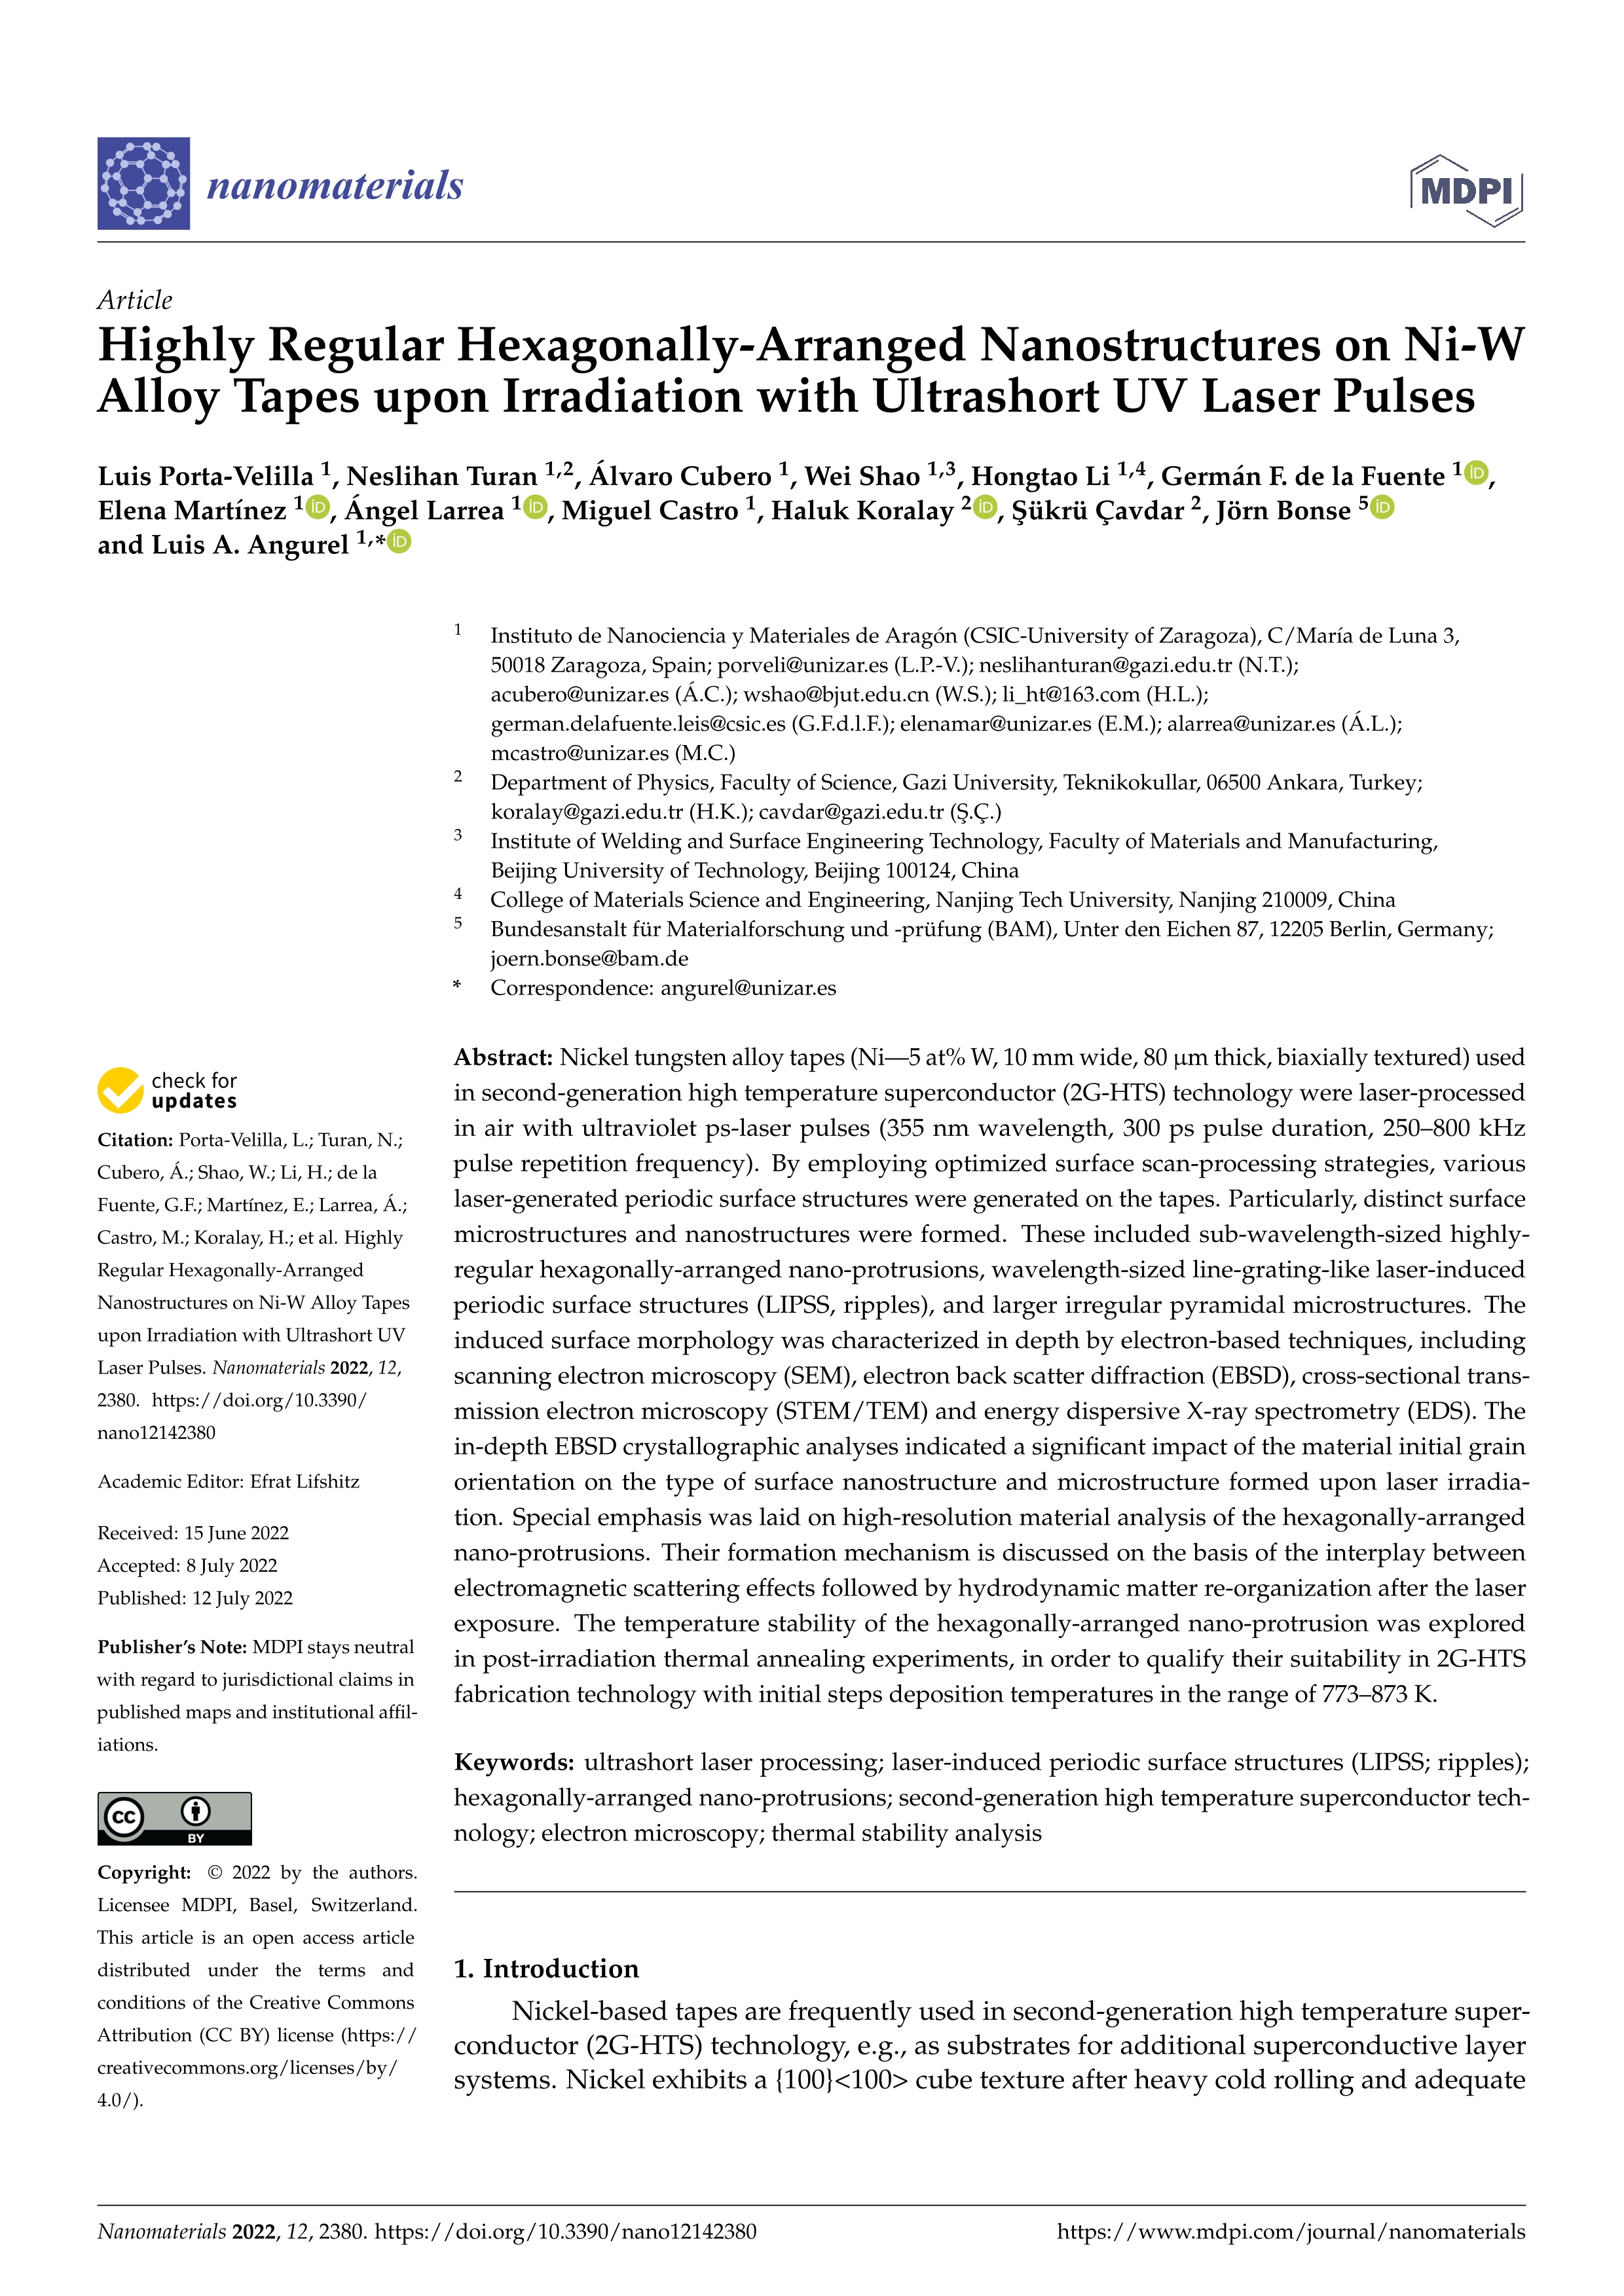 Highly regular hexagonally-arranged nanostructures on Ni-W alloy tapes upon irradiation with ultrashort UV laser pulses